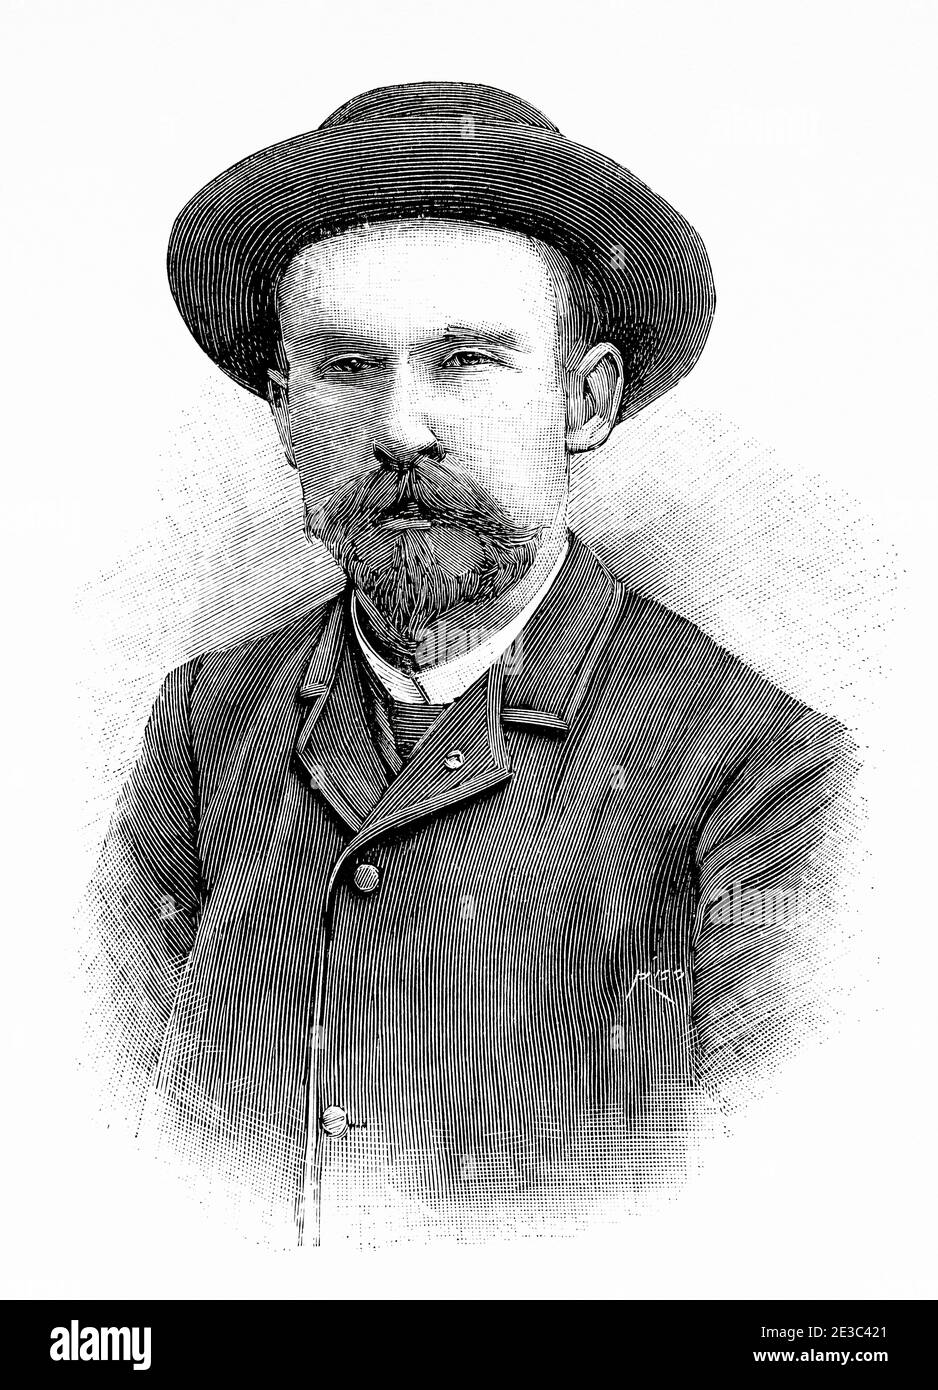 Portrait of Pierre Paul Emile Roux (1853-1933) French bacteriologist, assistant to Louis Pasteur. In 1894, with Yersin, discovered the non-toxic treatment for Diptheria. France. Old XIX century engraved illustration from La Ilustracion Española y Americana 1894 Stock Photo